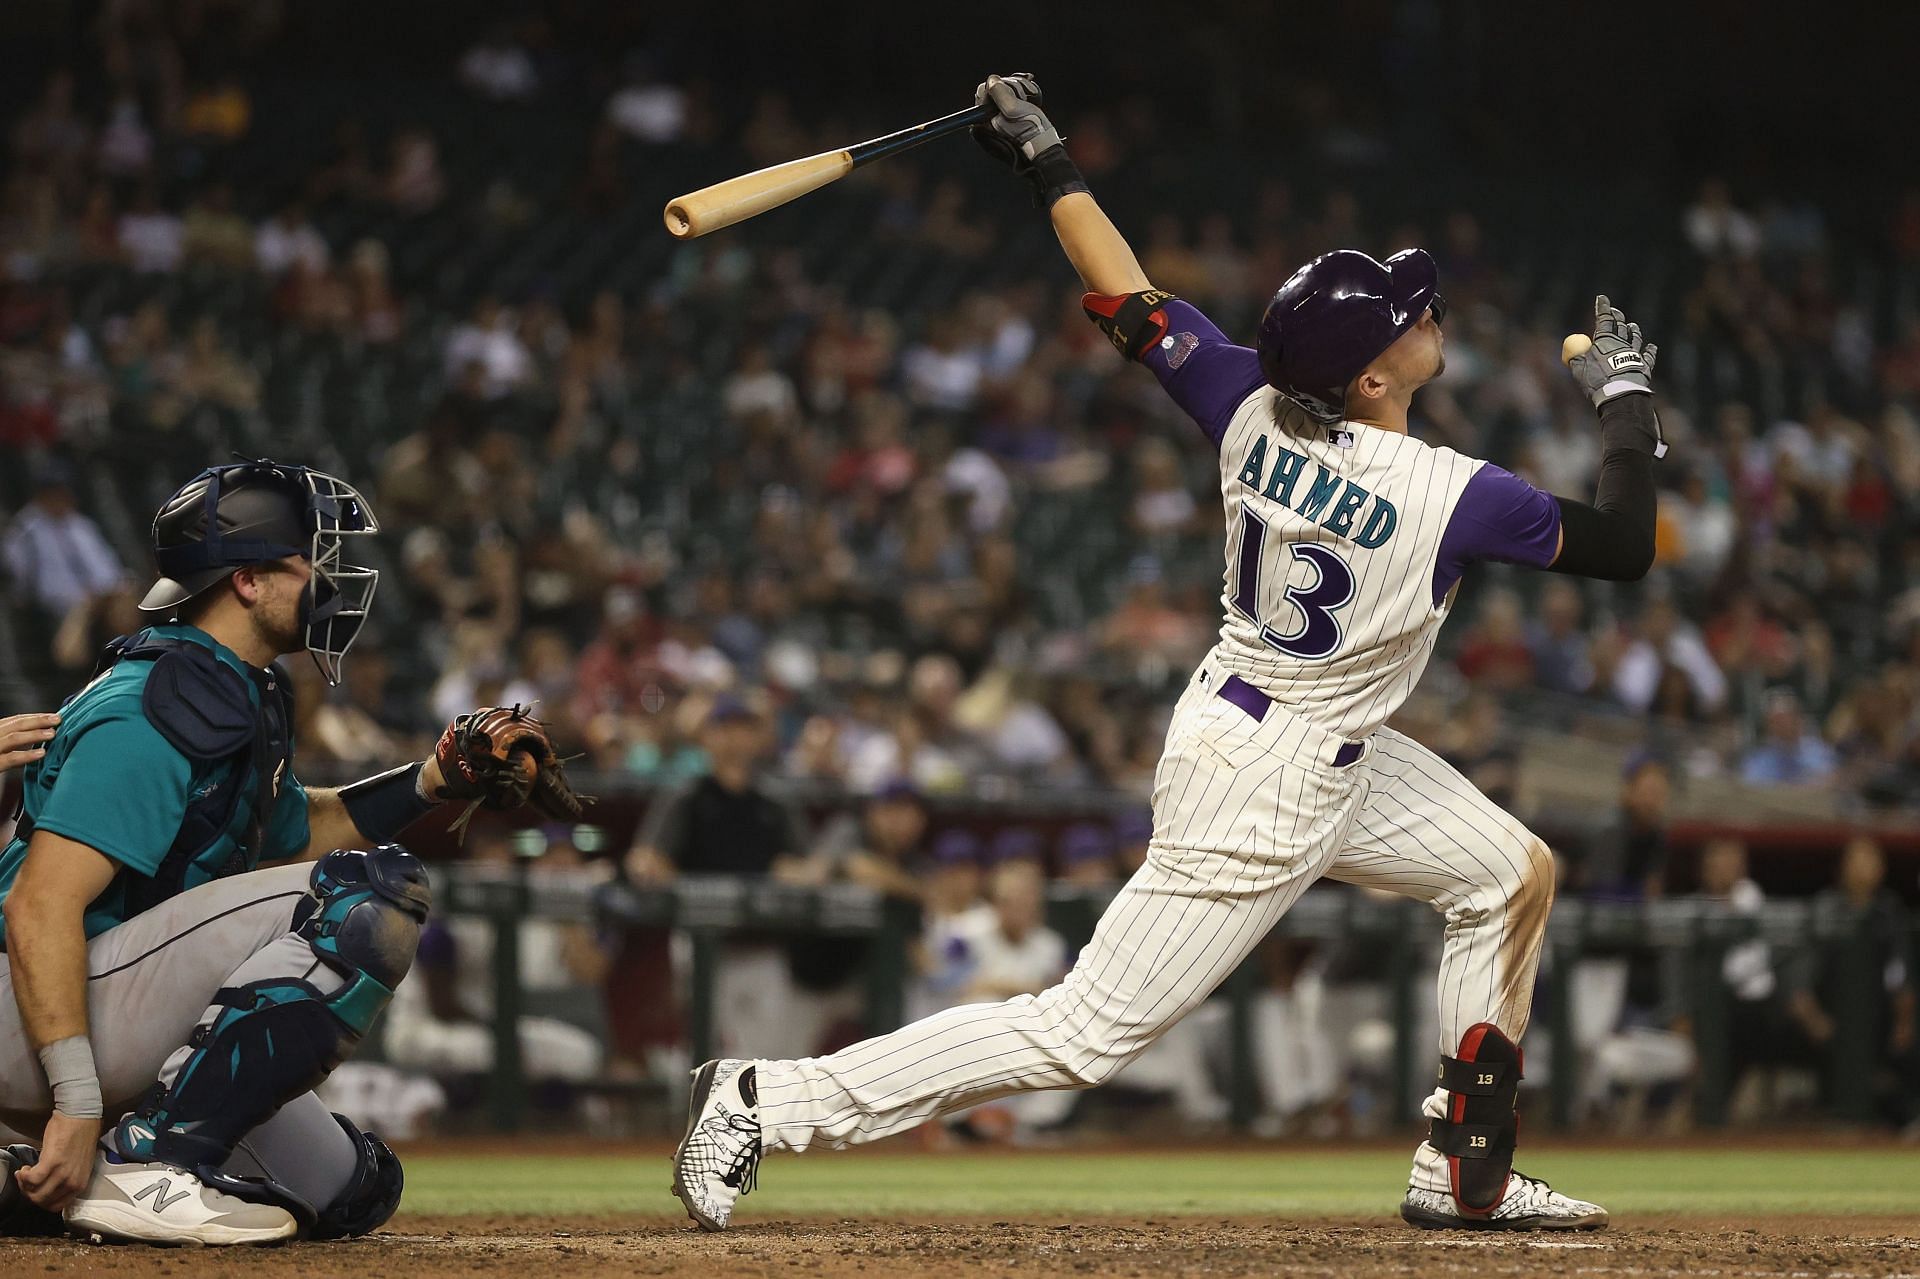 Nick Ahmed swings at a pitch during last years Mariners v Diamondbacks contest